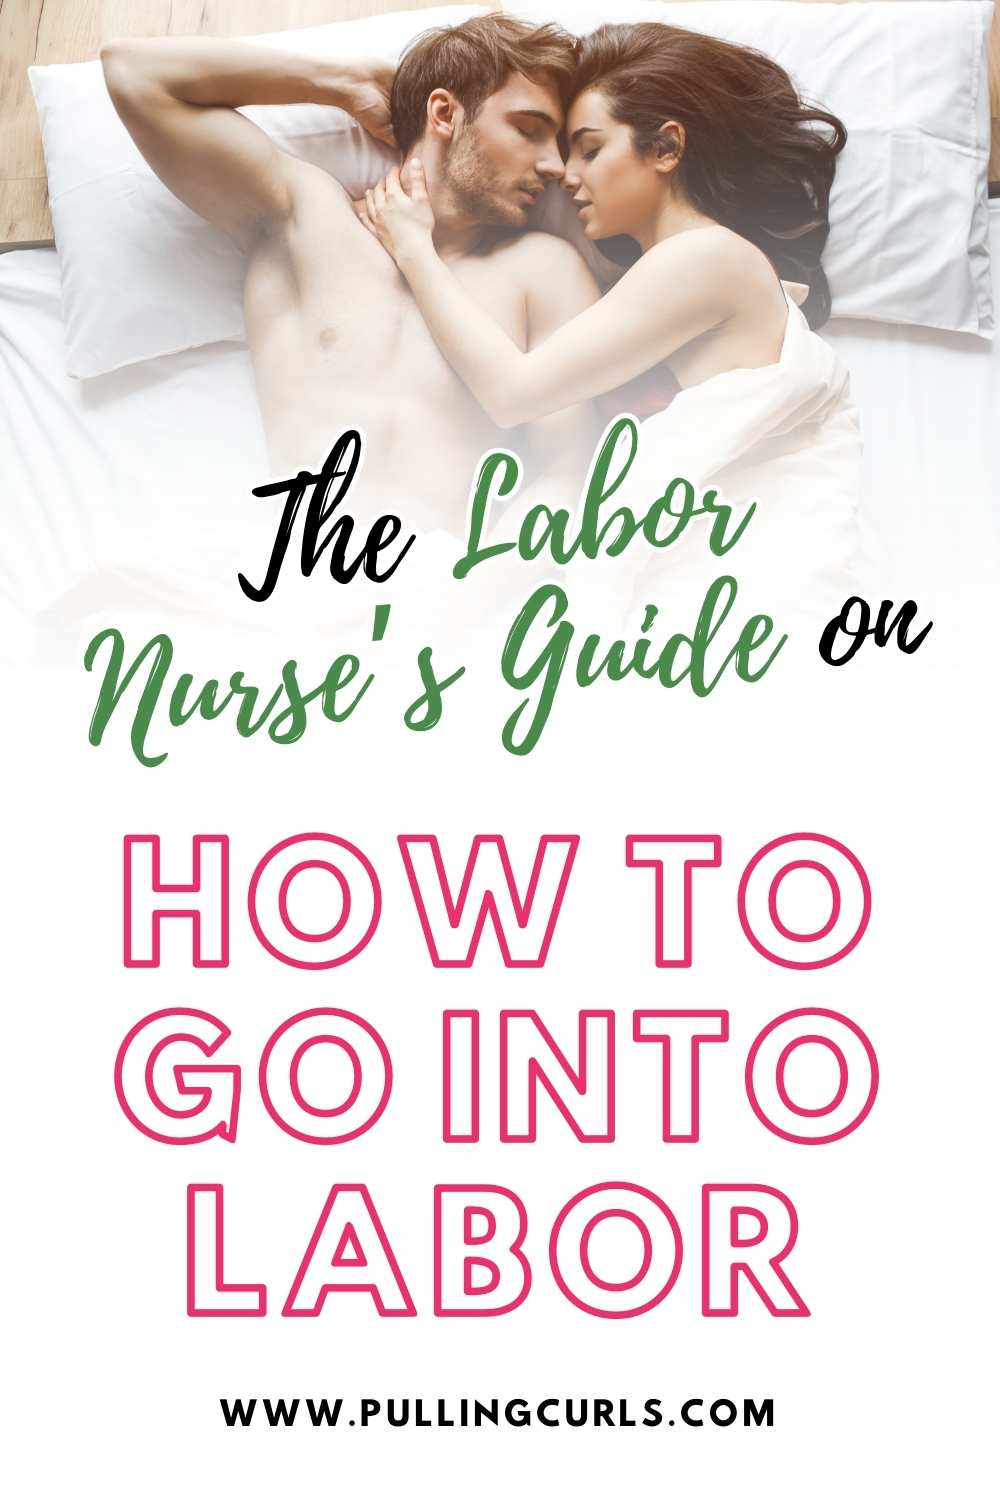 Let's talk about the ways to go into labor.  CAN you start labor on your own and what are some safe and effective ways to make you go into labor that you can try at home when your baby is term? via @pullingcurls